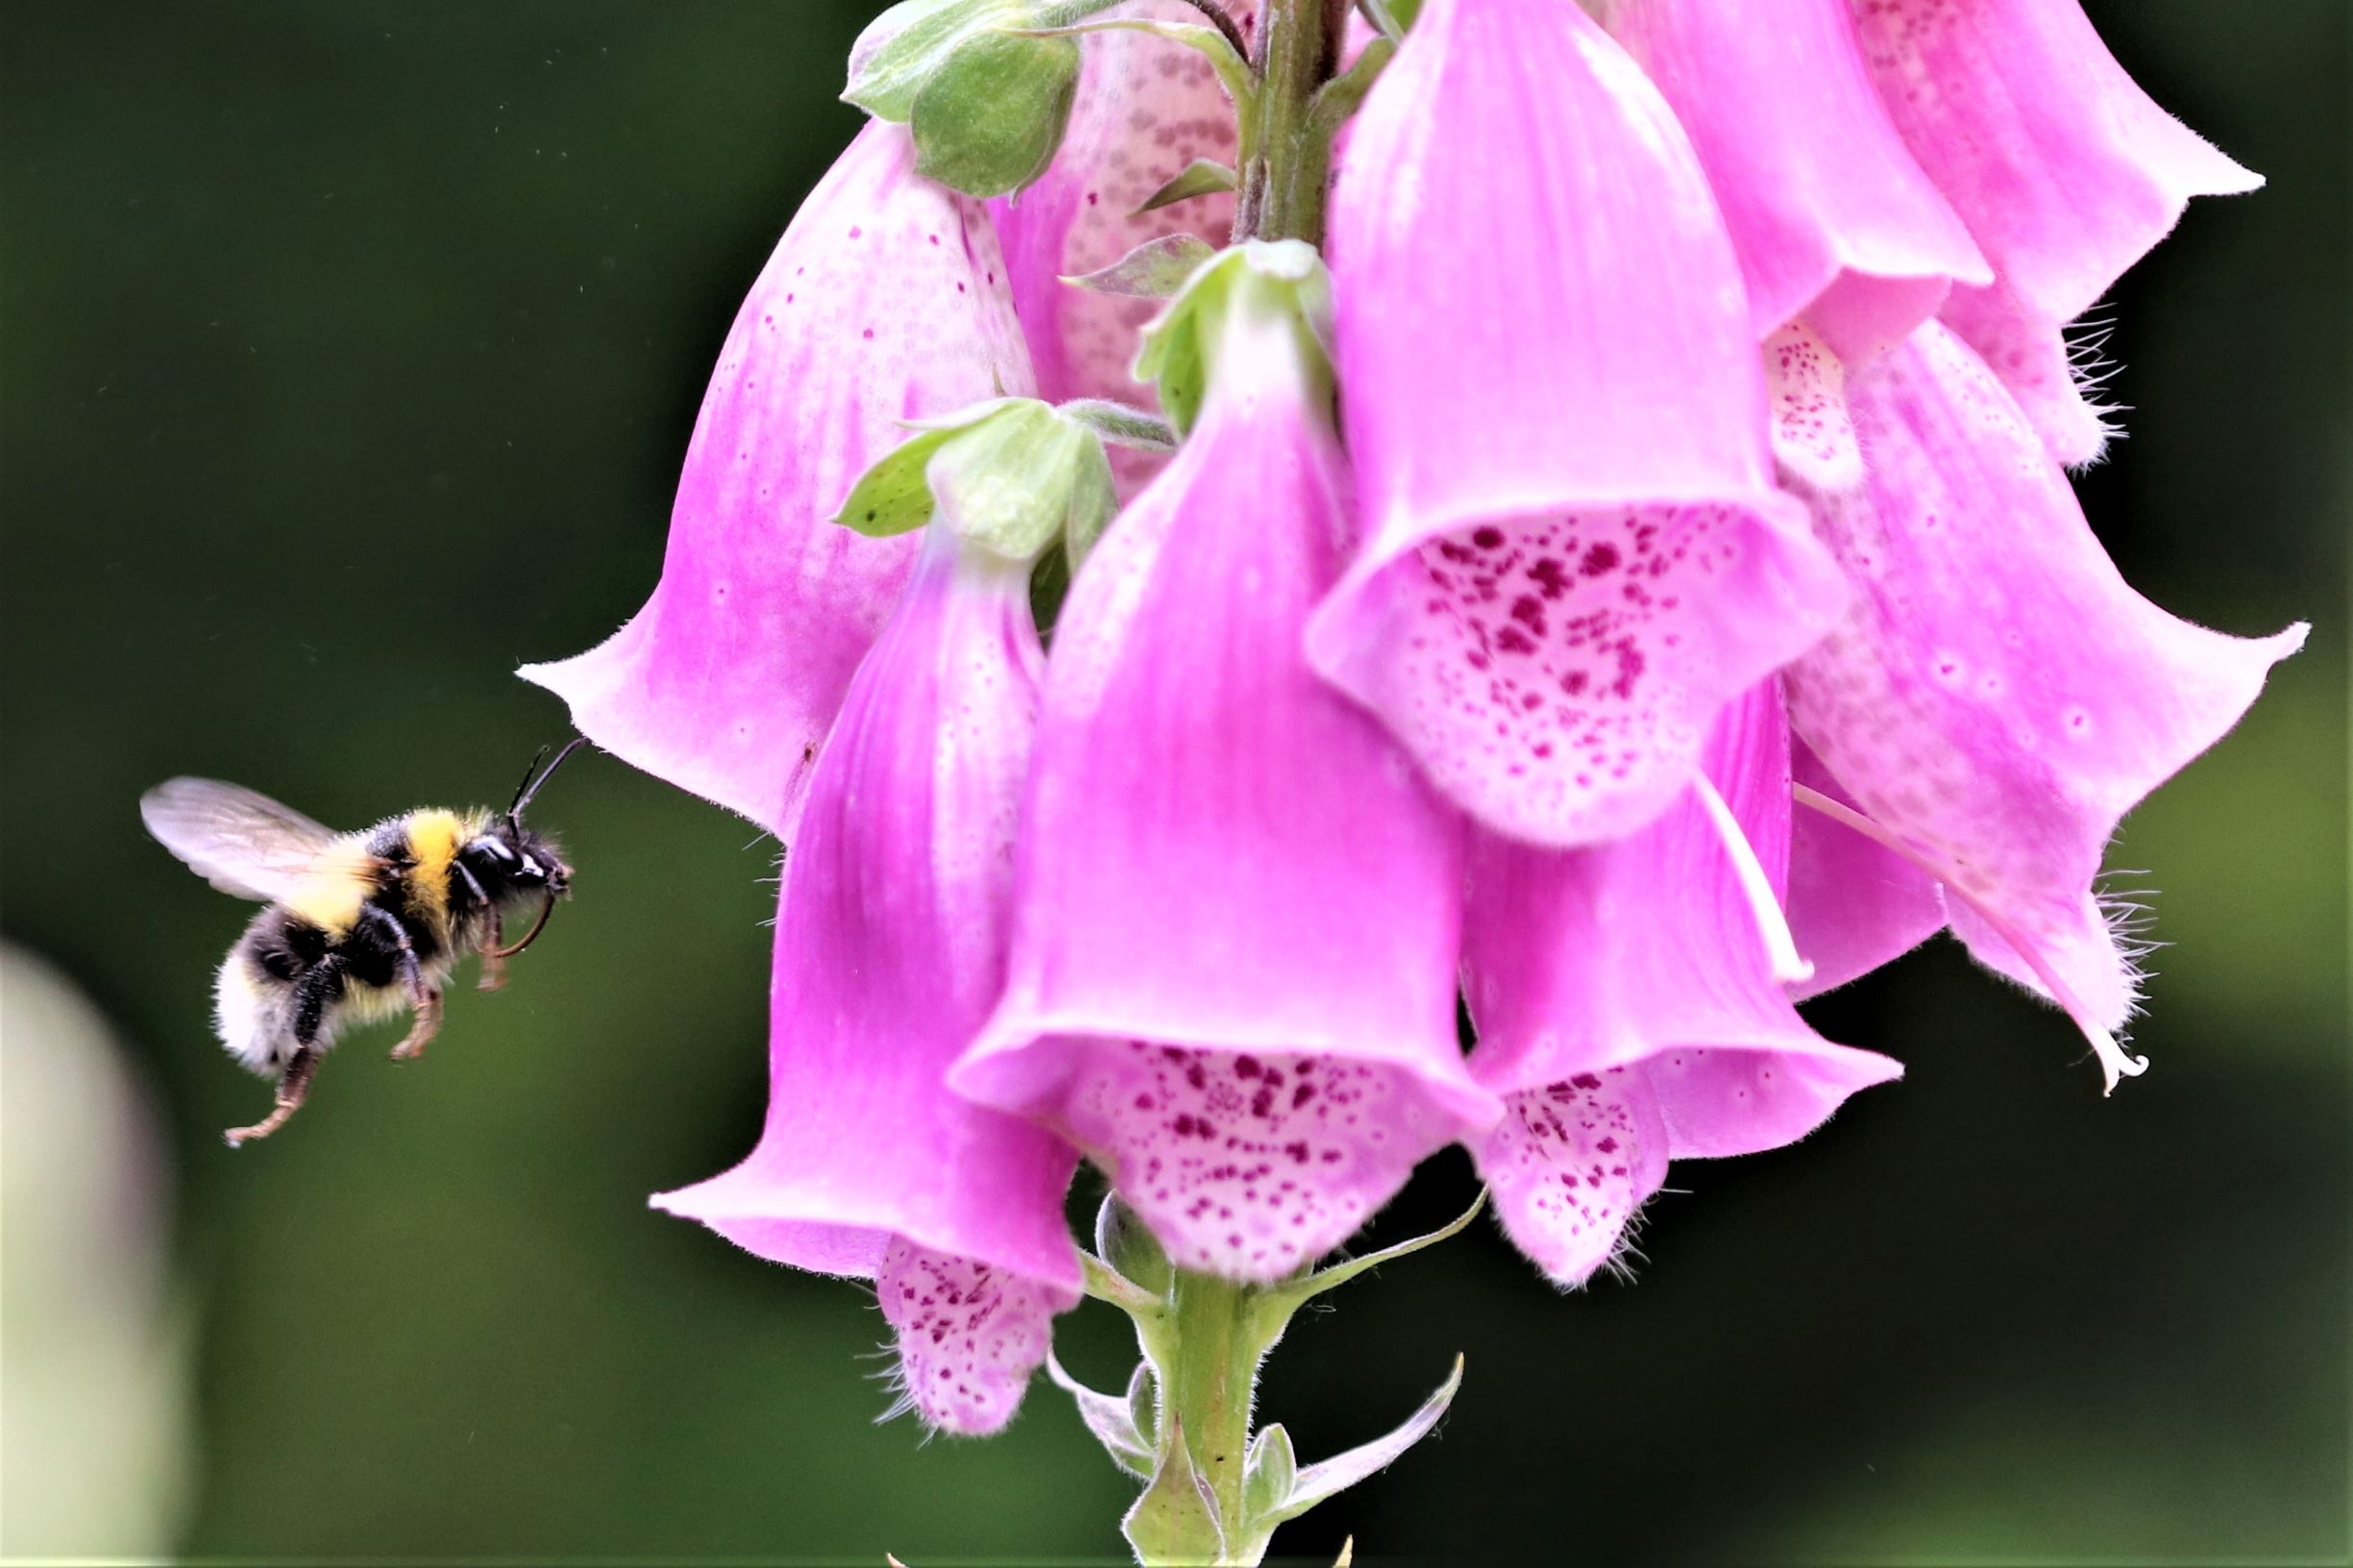 biodiversity: a close up image of a bumblebee in flight, approaching a bright pink foxglove for its nectar